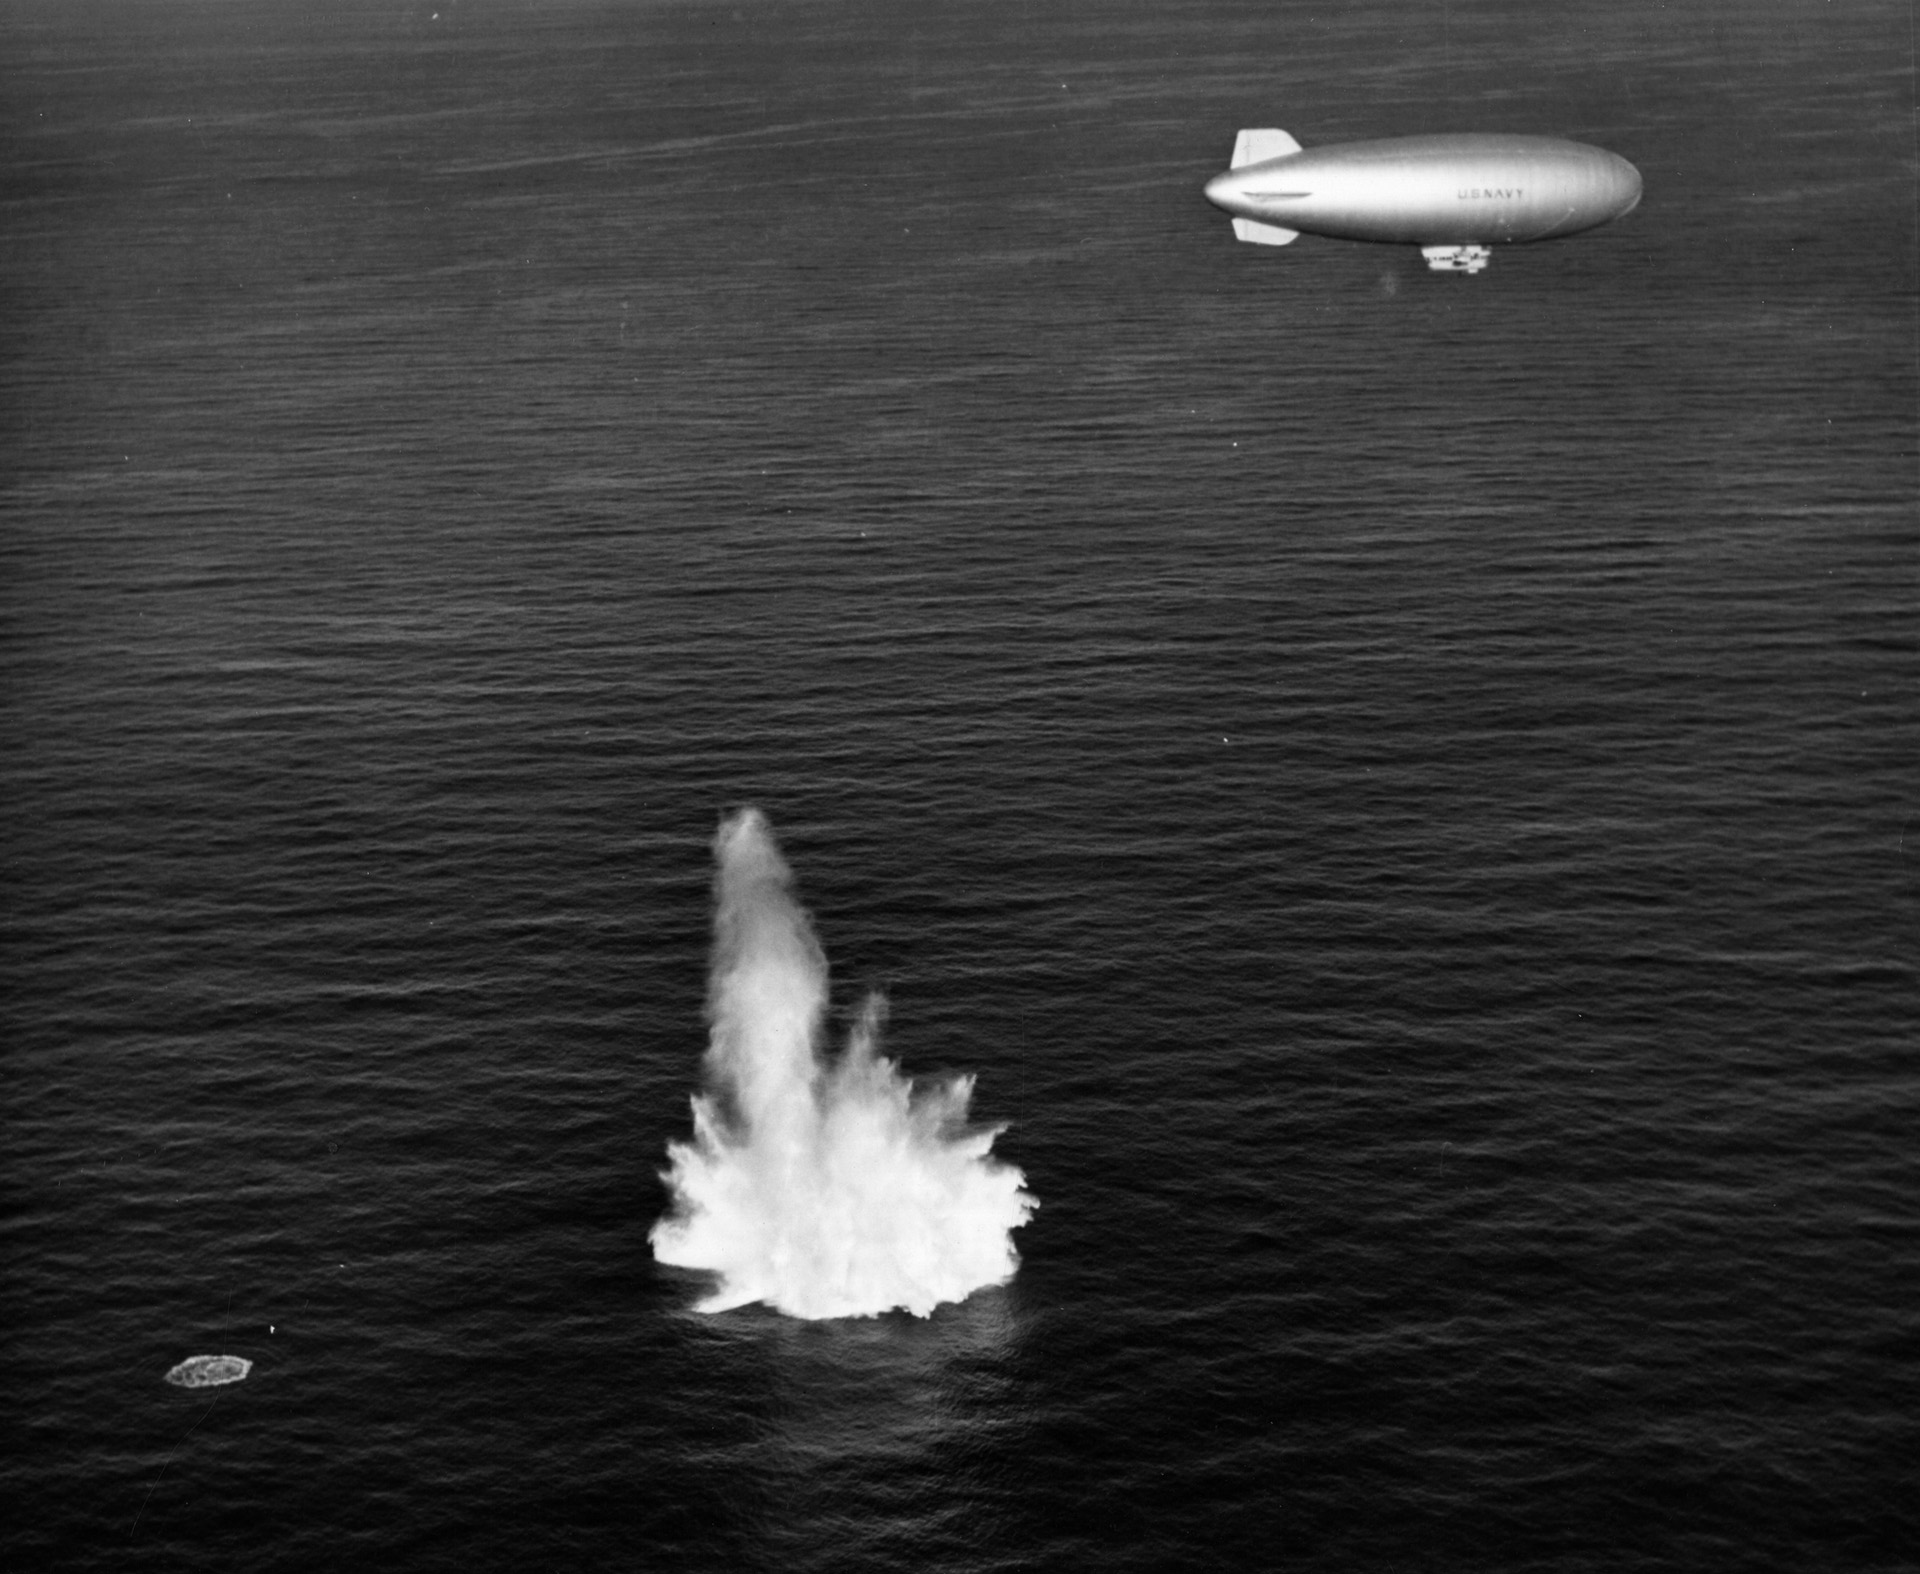 A U.S. Navy blimp drops a depth charge into the ocean during exercises in 1943. This target practice sequence occurred off the coast of New Jersey and the base at Lakehurst, which had gained fame as the site of the destruction of the German airship Hindenburg in 1937.